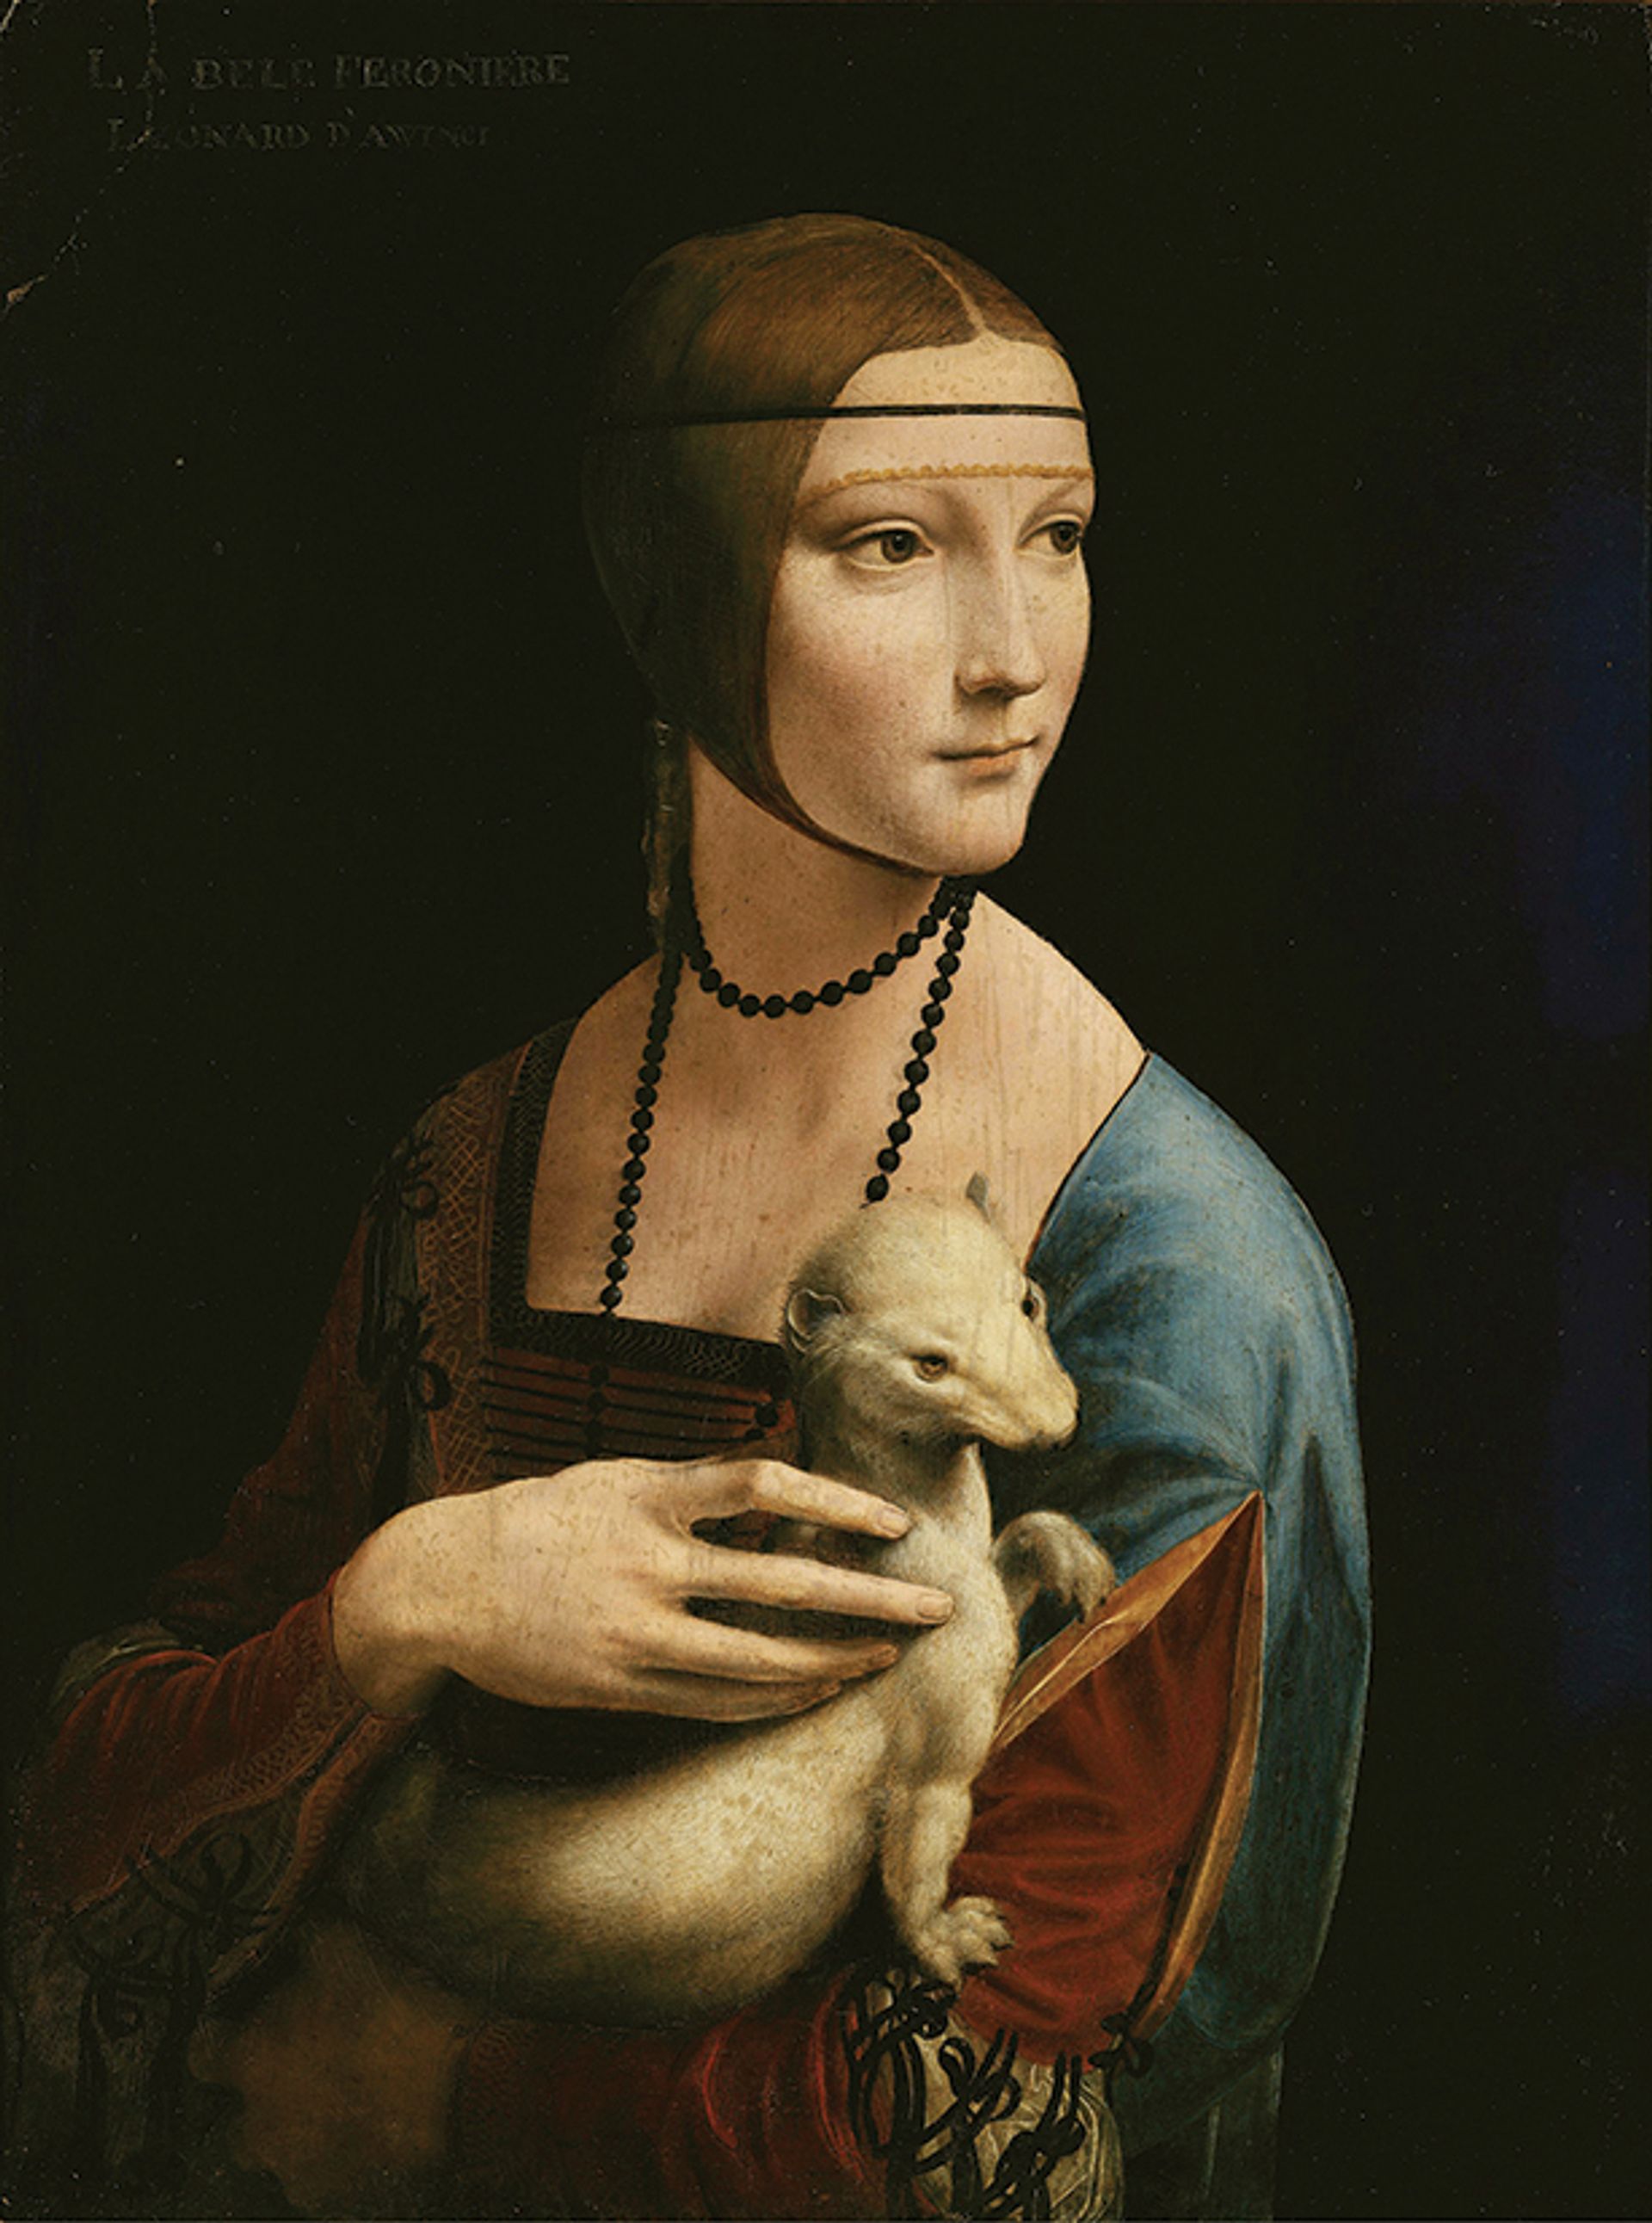 Animal magic: there are several theories about the symbolism of the ermine in Leonardo’s portrait of Cecilia Gallerani National Museum in Kraków